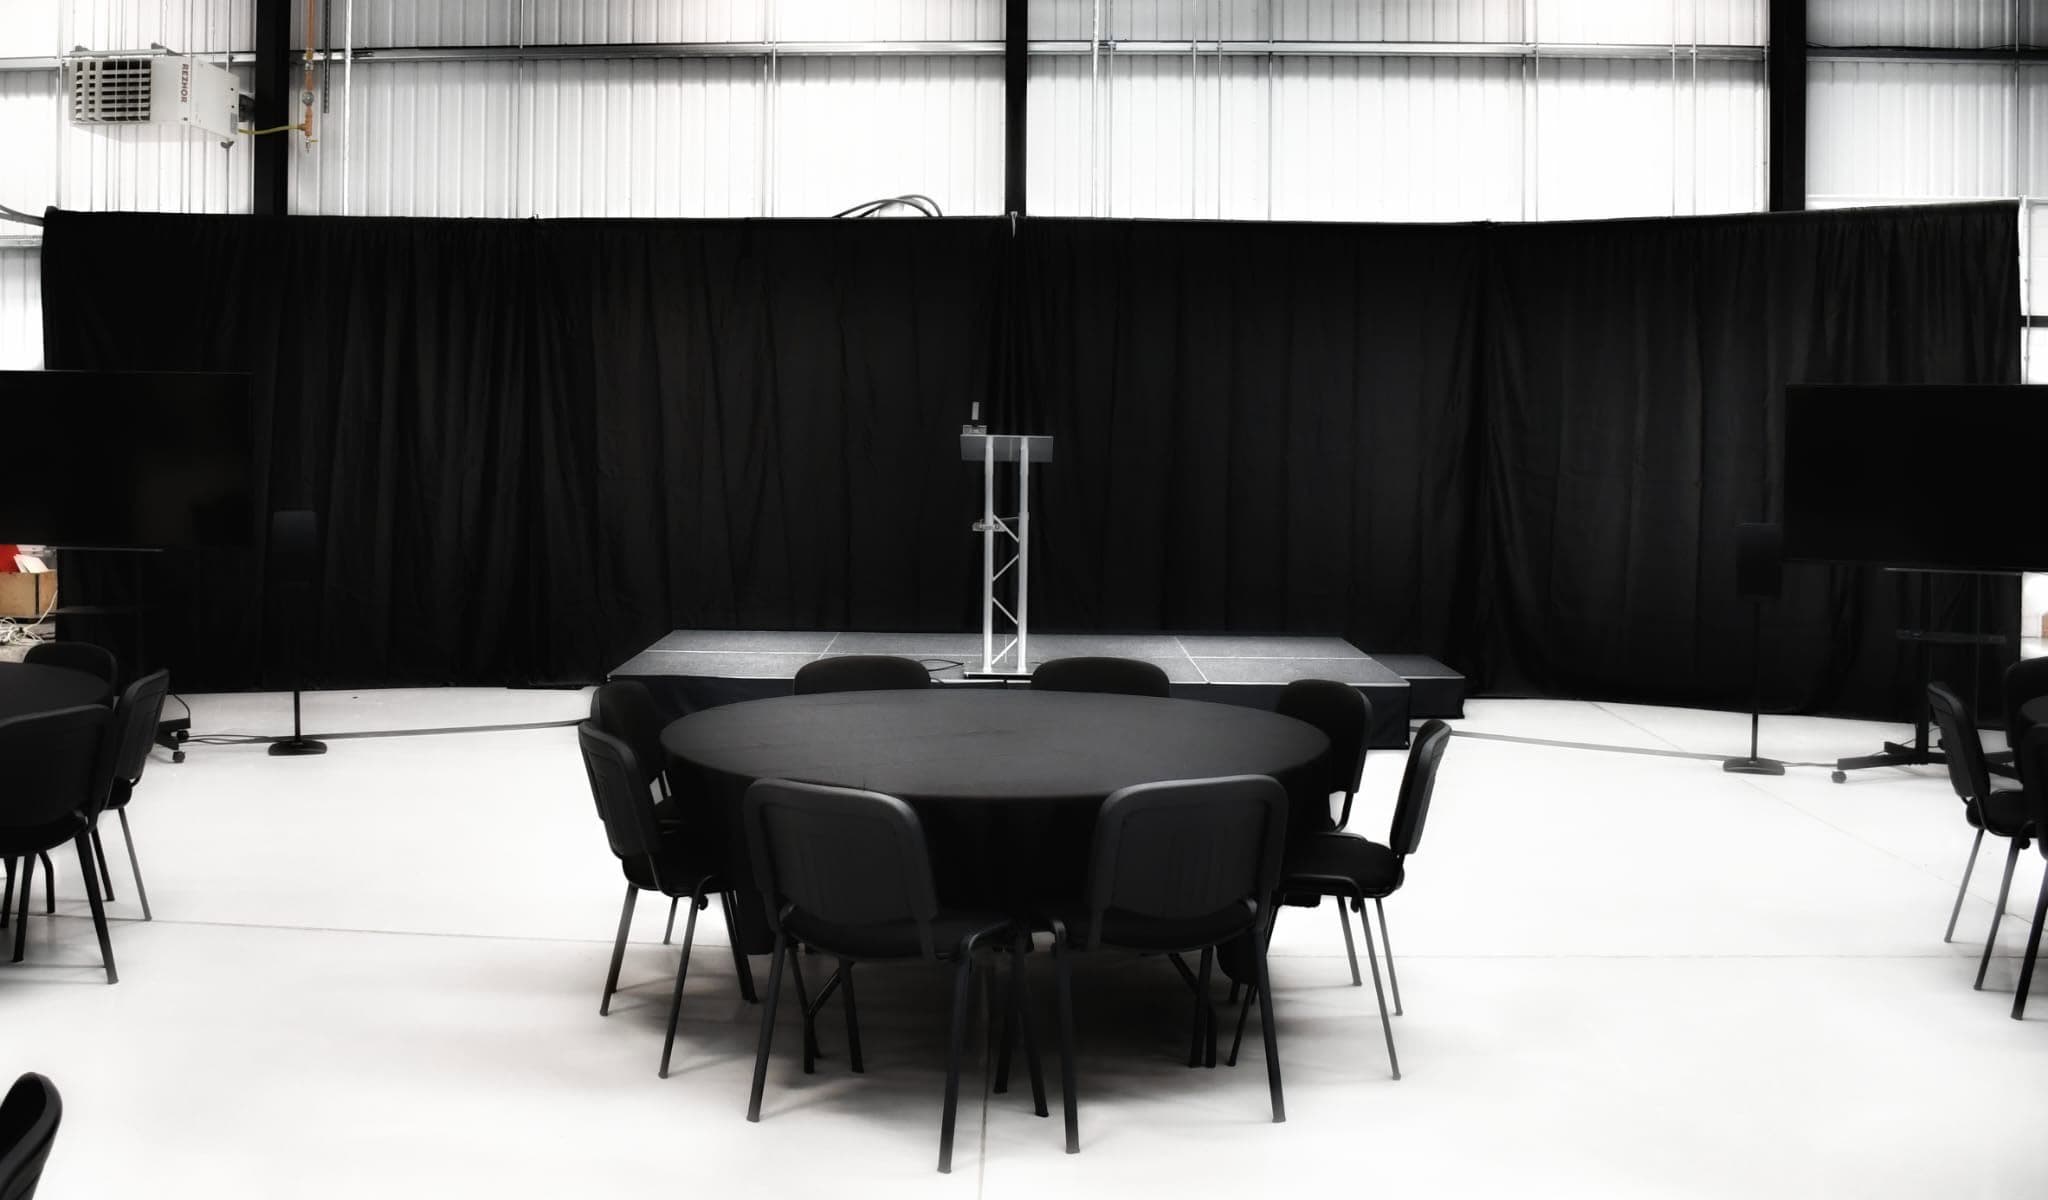 portable-staging-backdrop-curtain-kit-3m-6m-12m